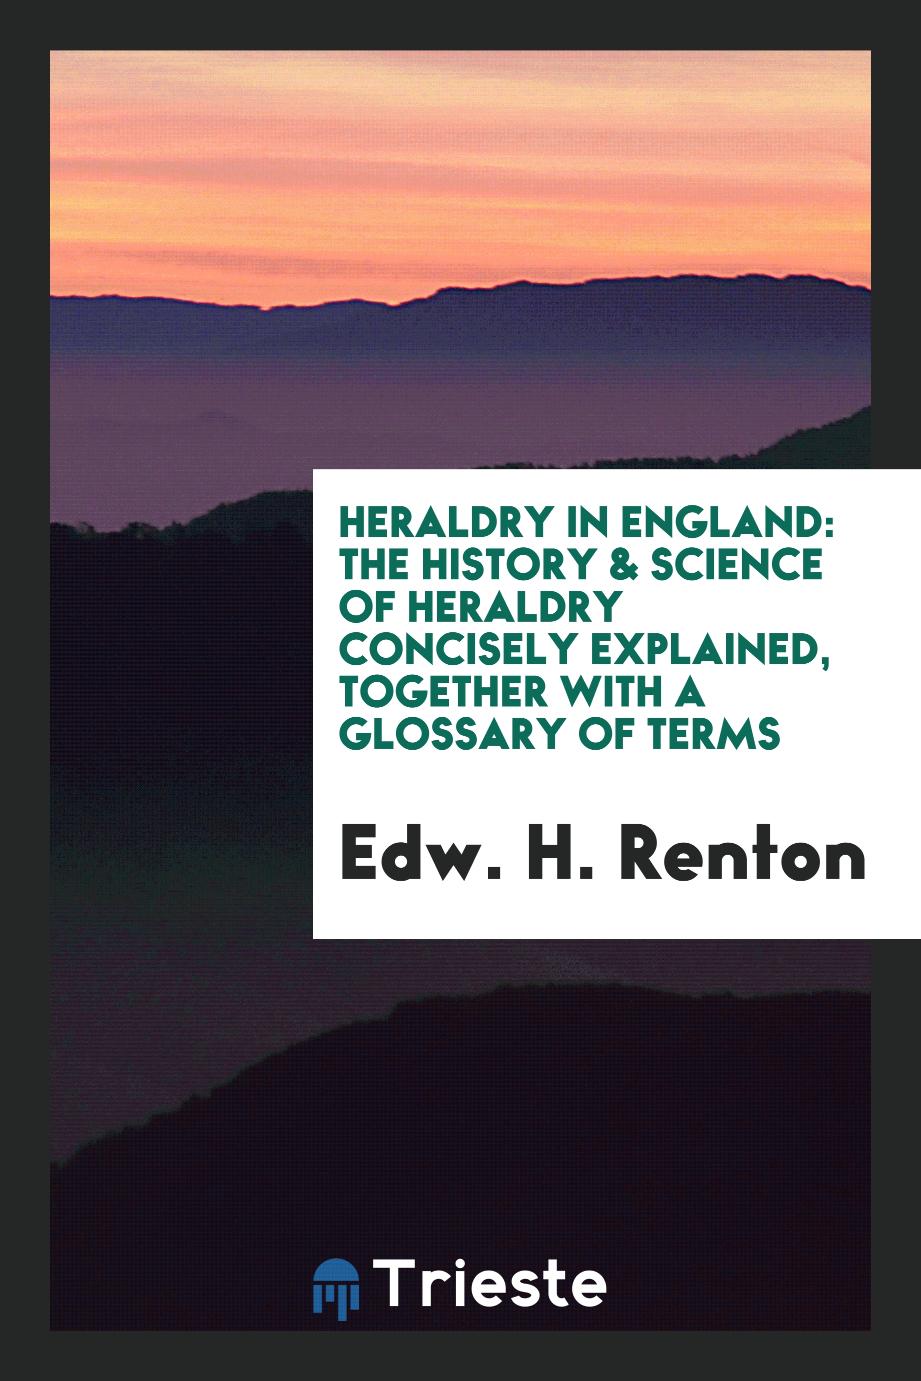 Heraldry in England: The History & Science of Heraldry Concisely Explained, Together with a Glossary of Terms